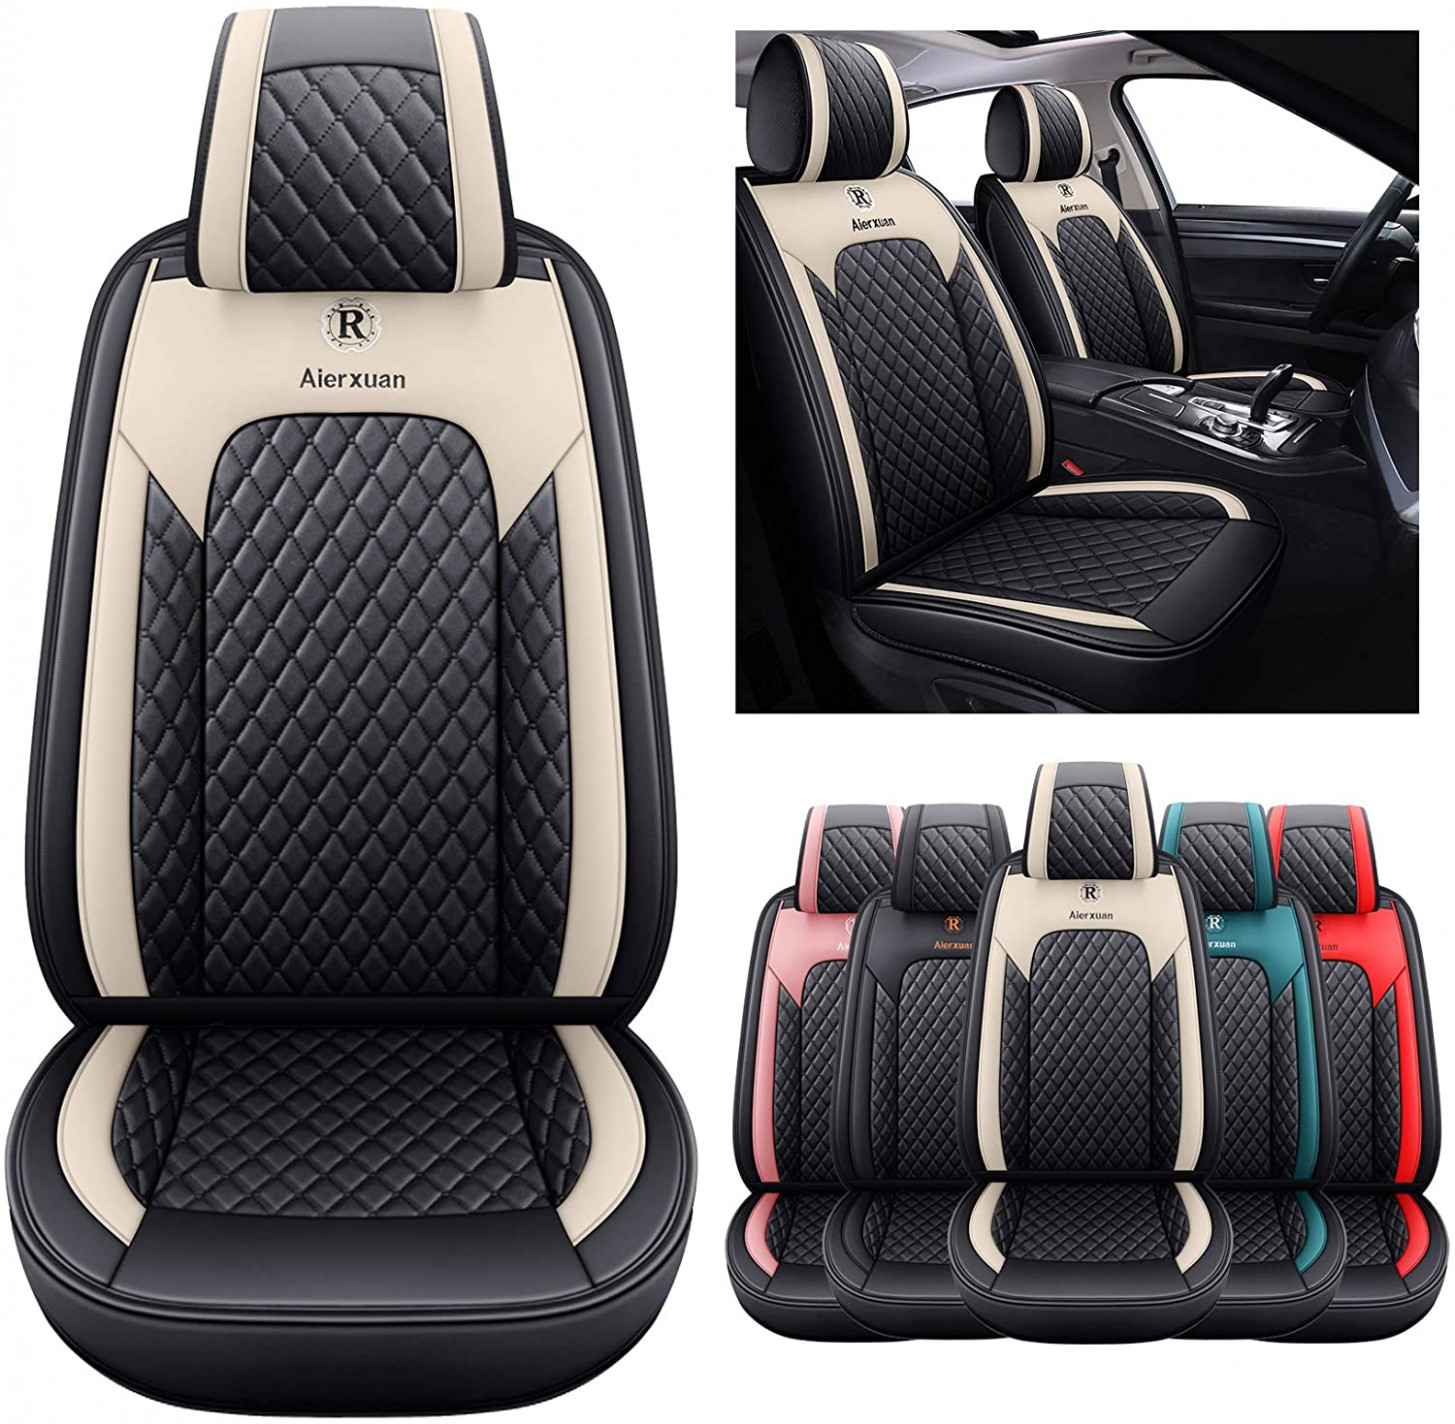 5 Front Seat Covers for Cars Leather Waterproof Vehicle Cushions Universal  Fit for Kia Soul Sorento Optima Sporage Mazda Toyota Chr Prius Venza Fj  - seat covers for kia sorento